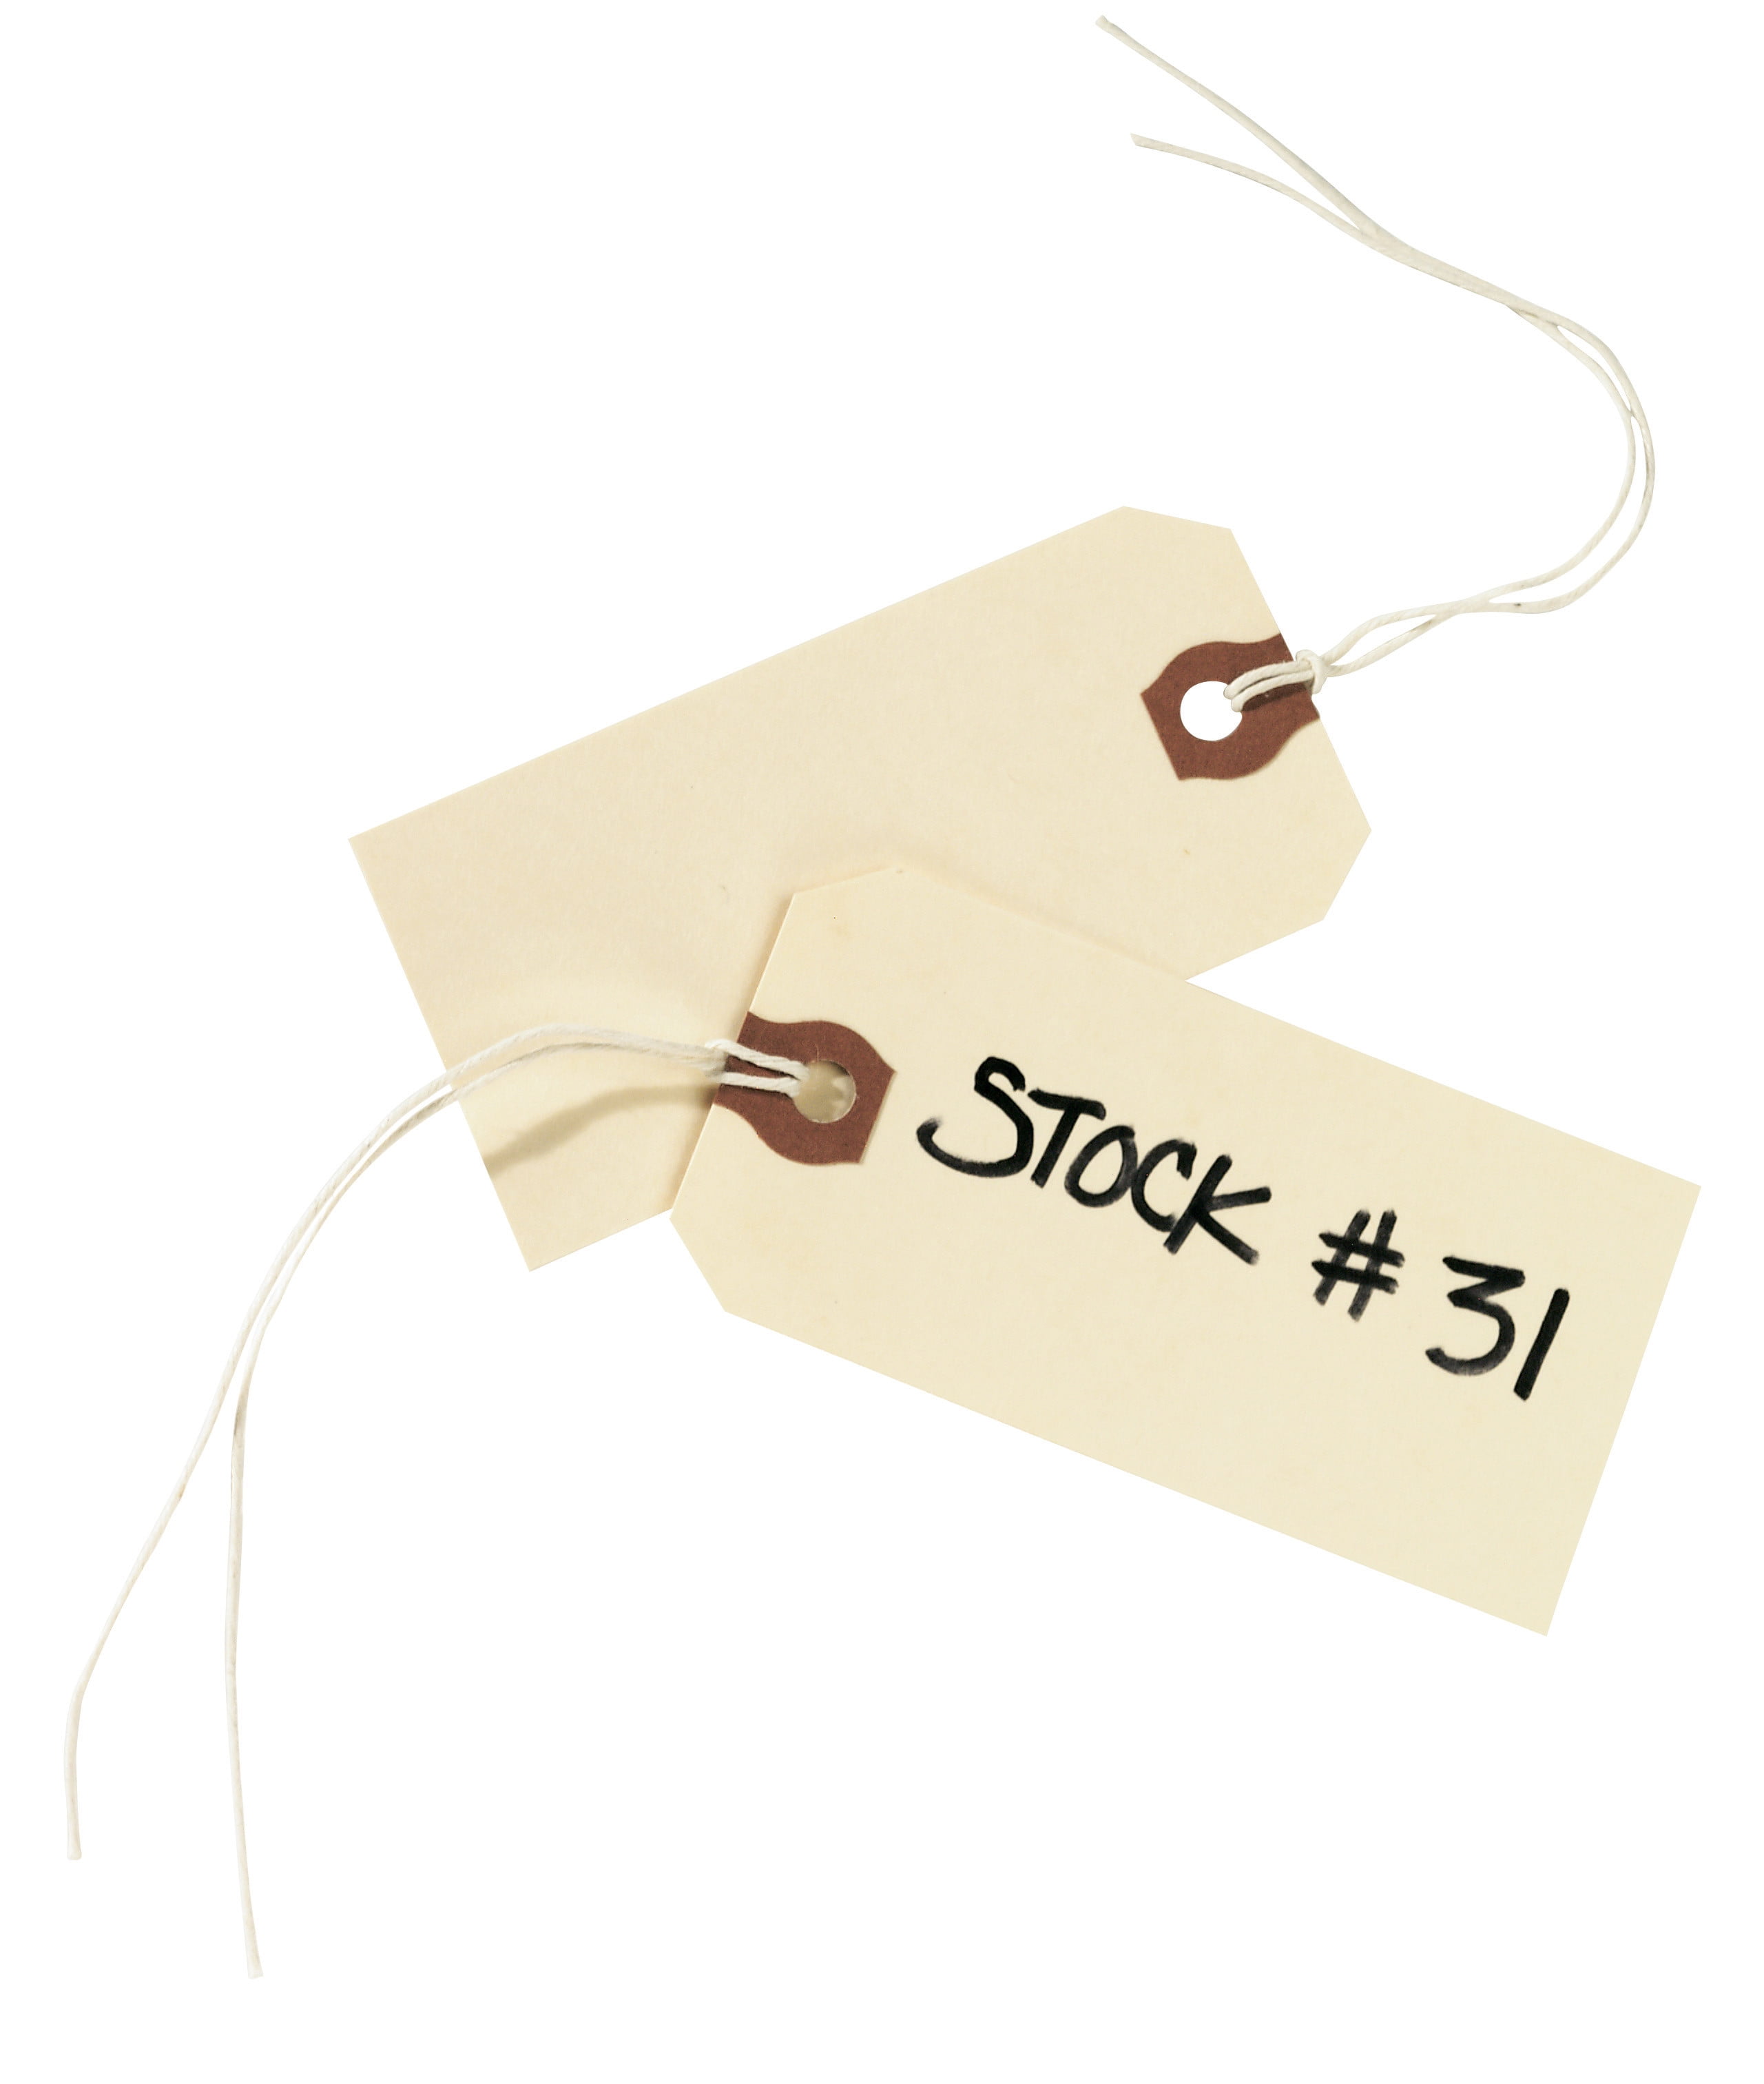 RED string tags price tags 1000 pre-strung tags merchandise pricing 